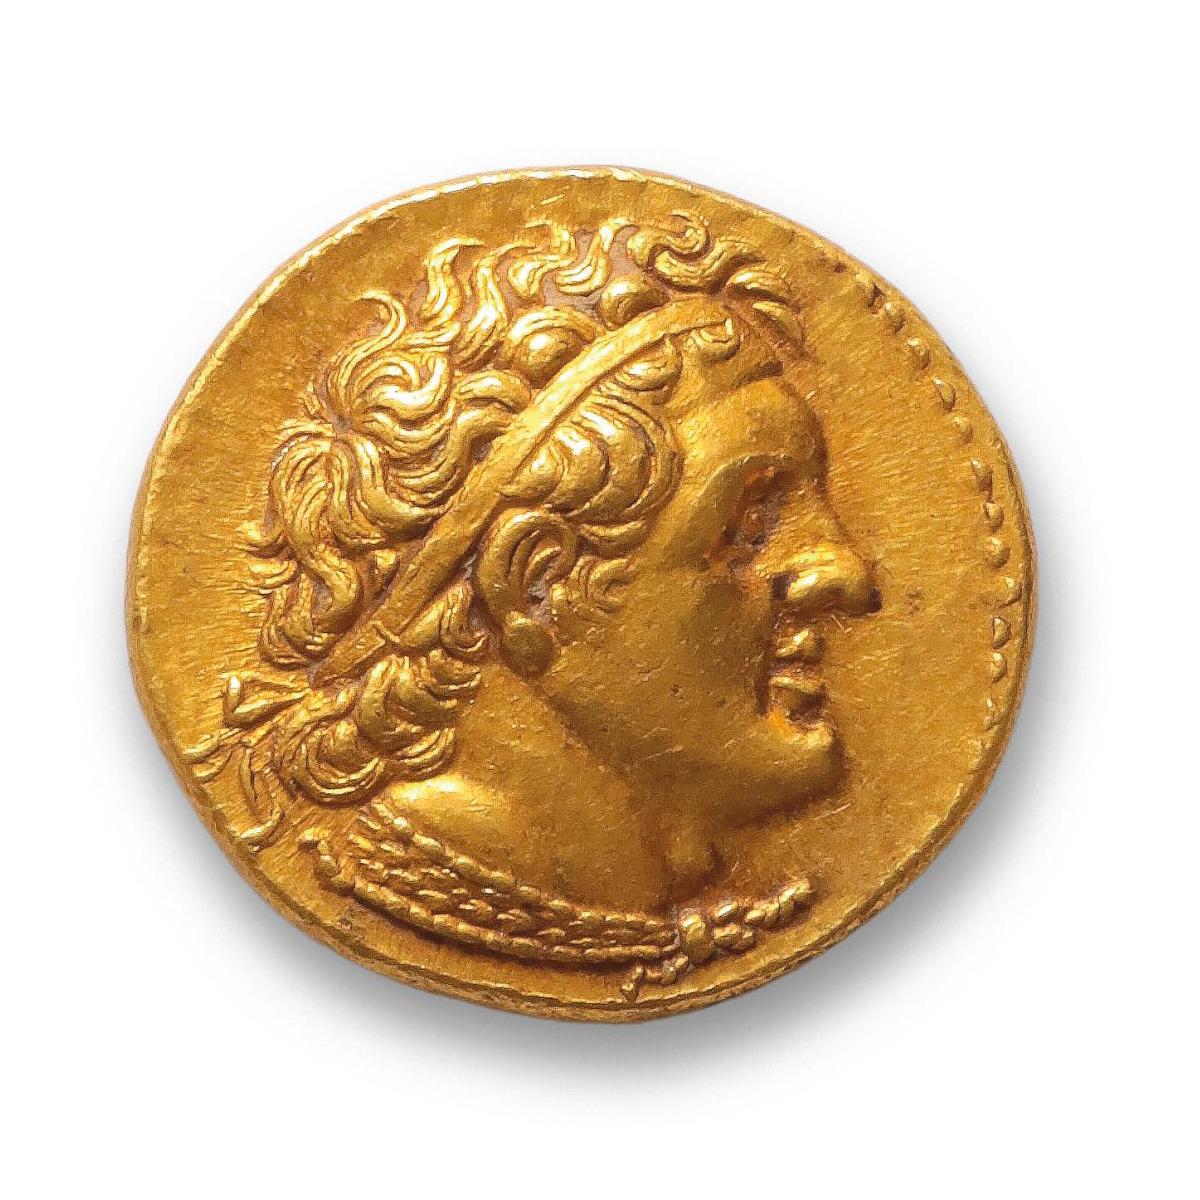 Coins of the Ptolemaic Dynasty - Lots sold